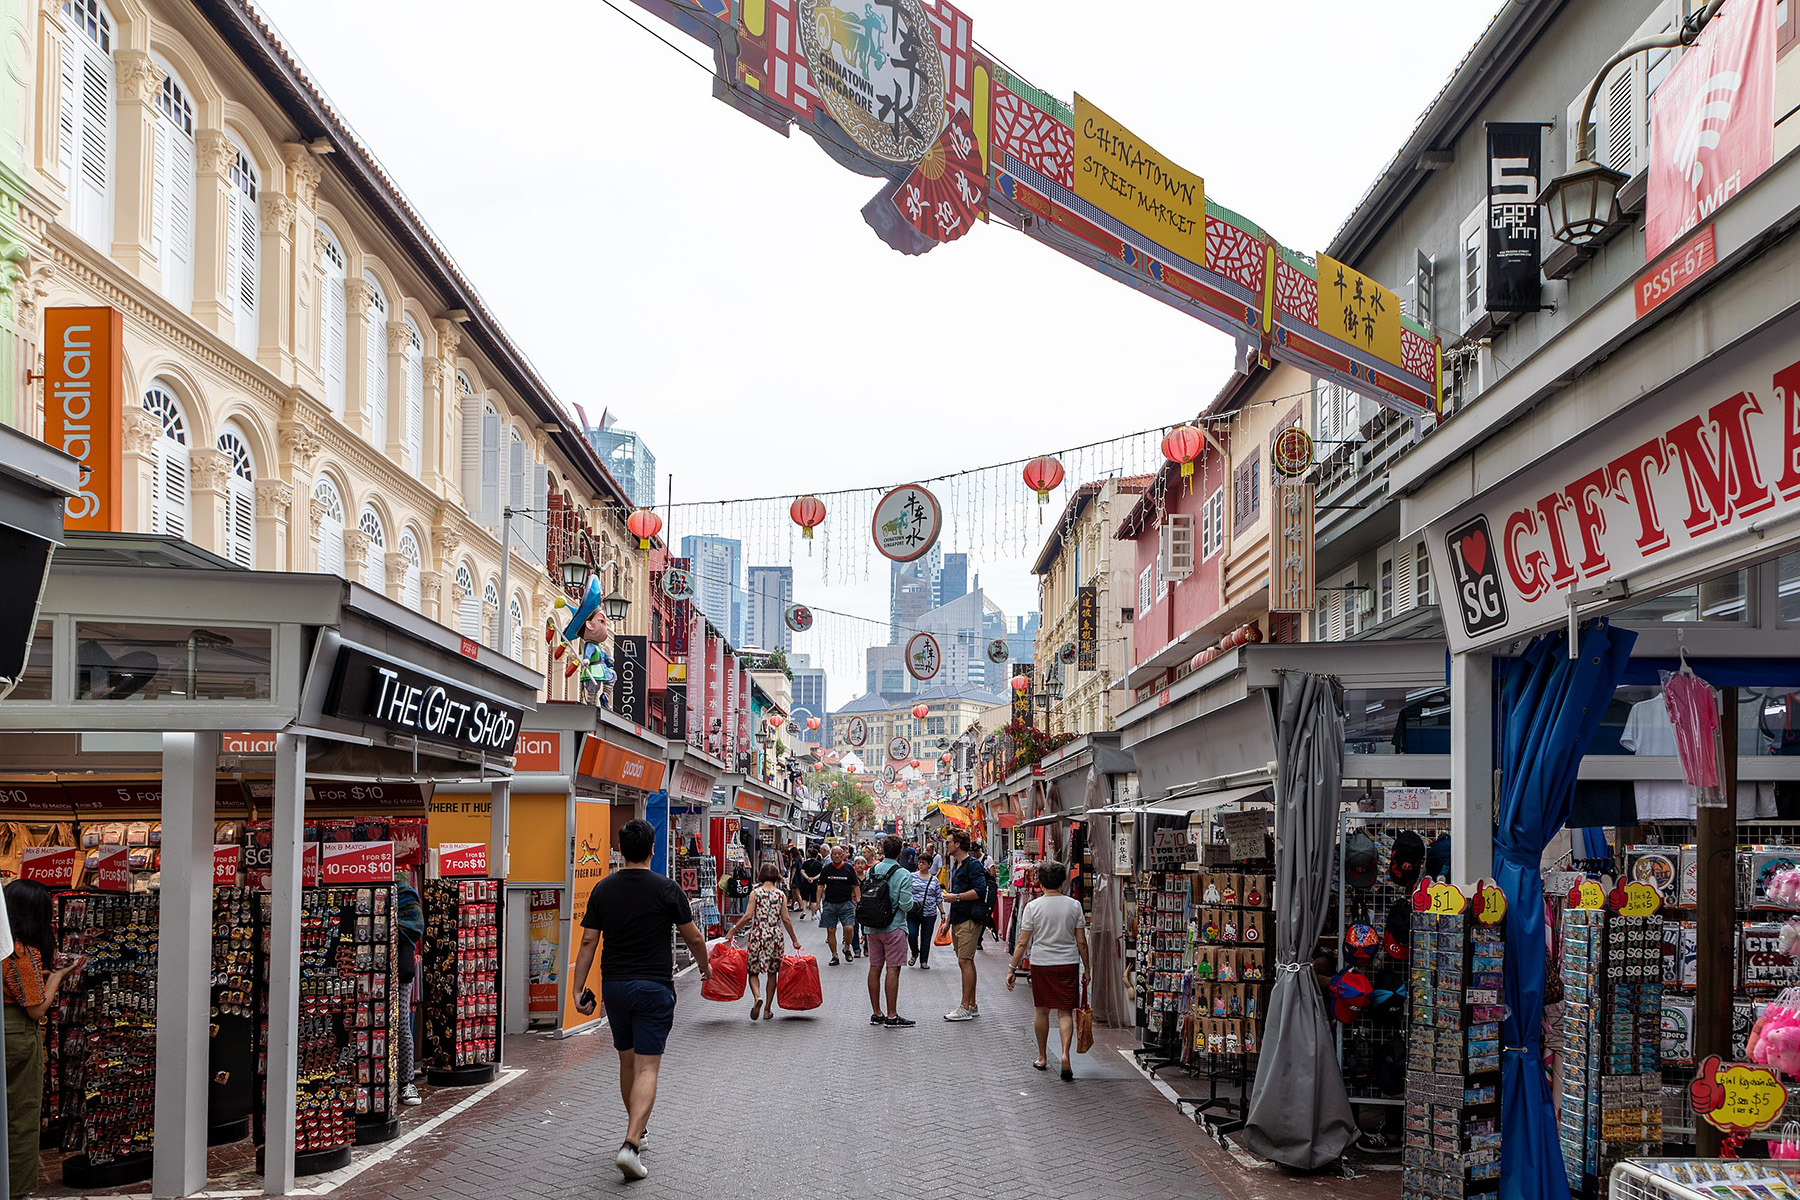 People walking through a quiet shopping alley in Chinatown, Singapore.